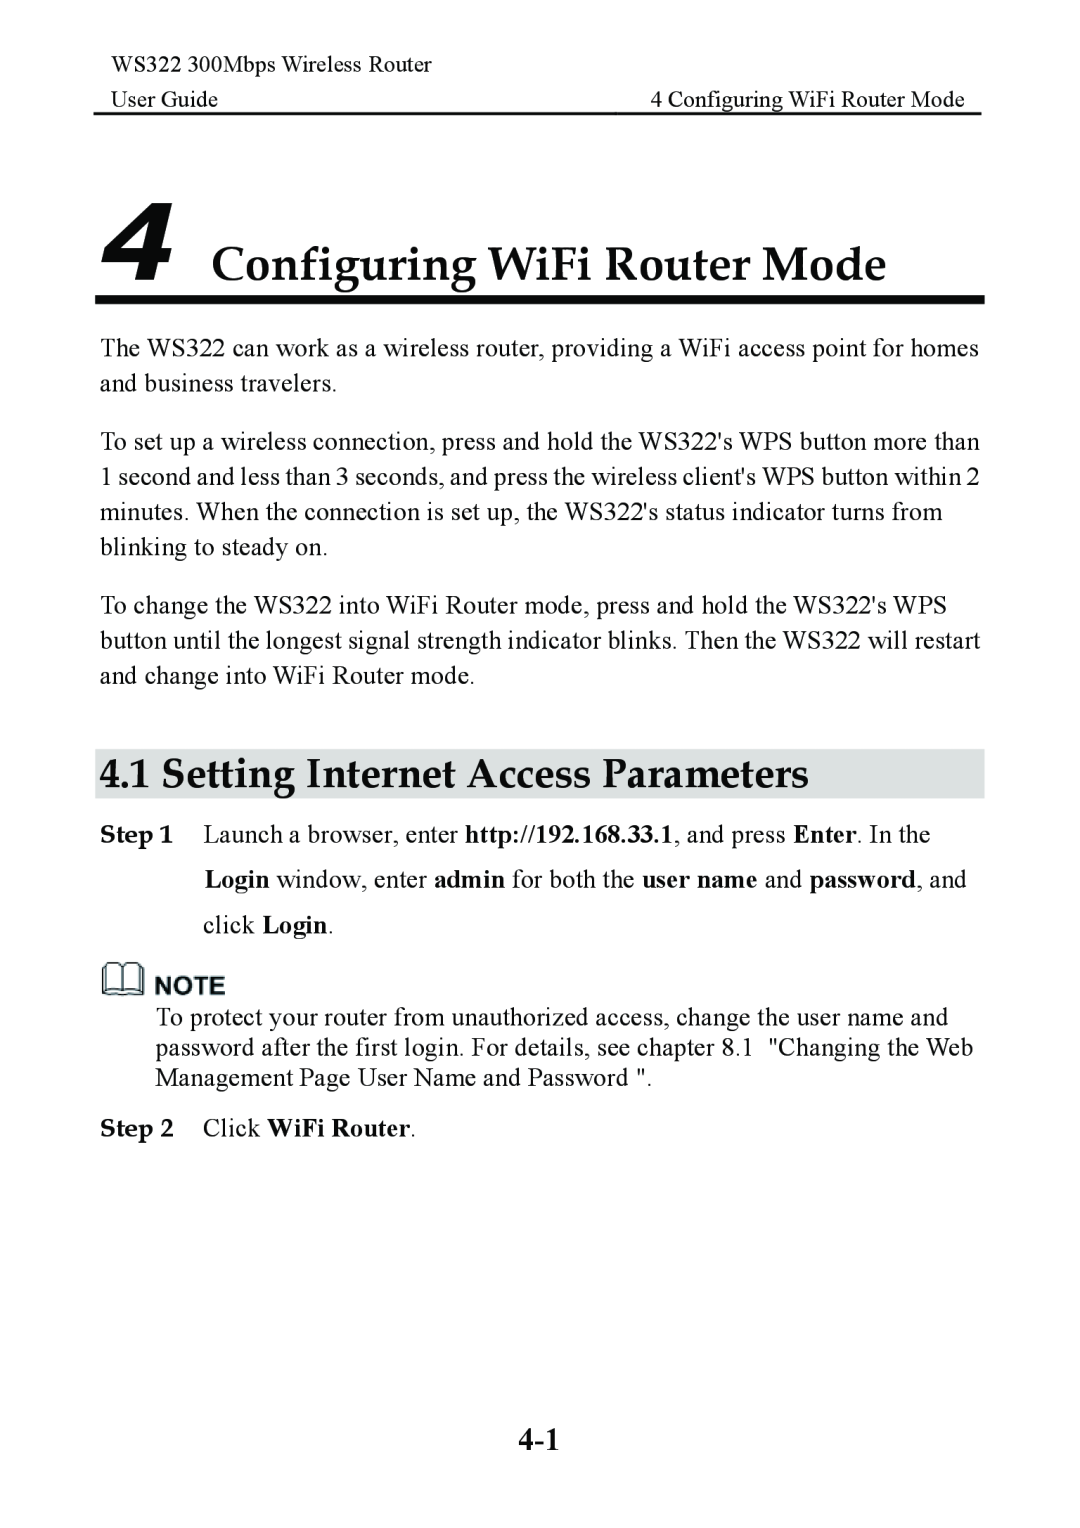 Huawei WS322 manual Configuring WiFi Router Mode, Setting Internet Access Parameters, Click WiFi Router 